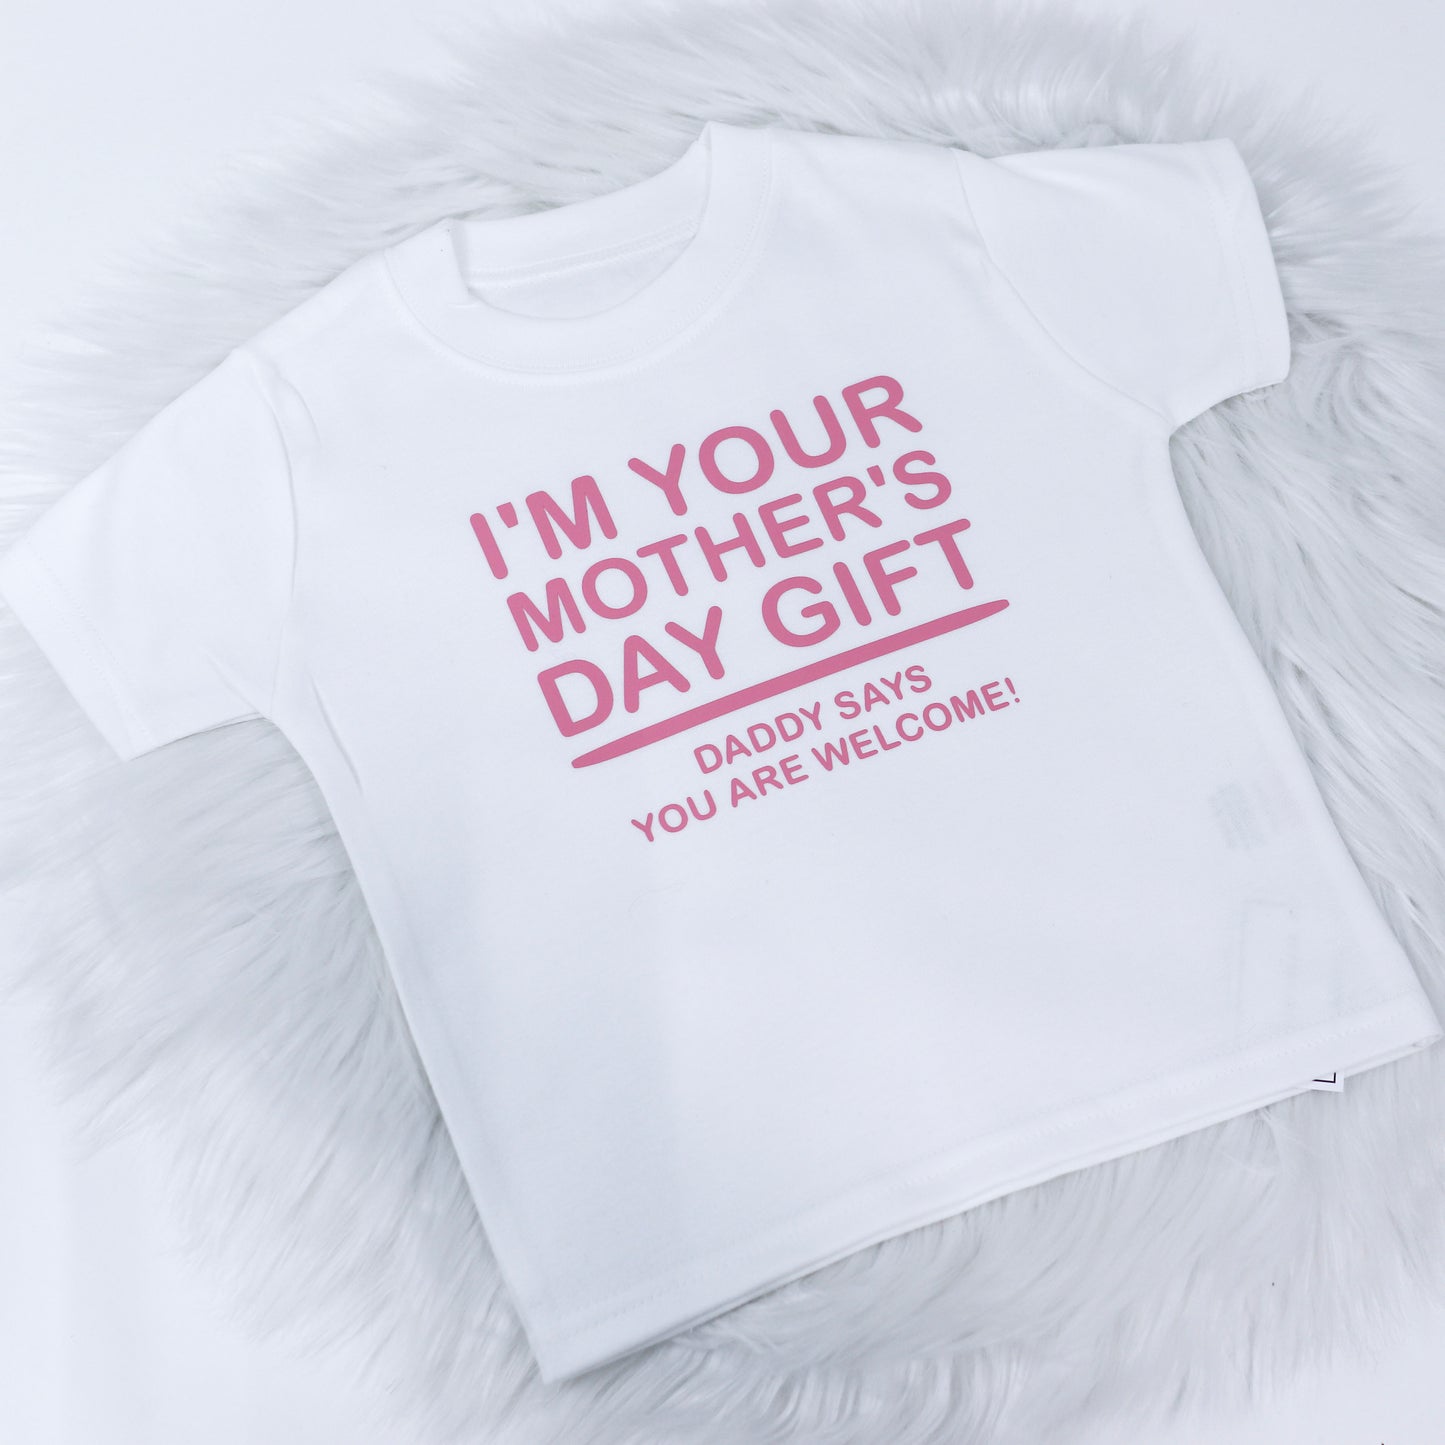 I'm Your Mother's Day Gift T-Shirt